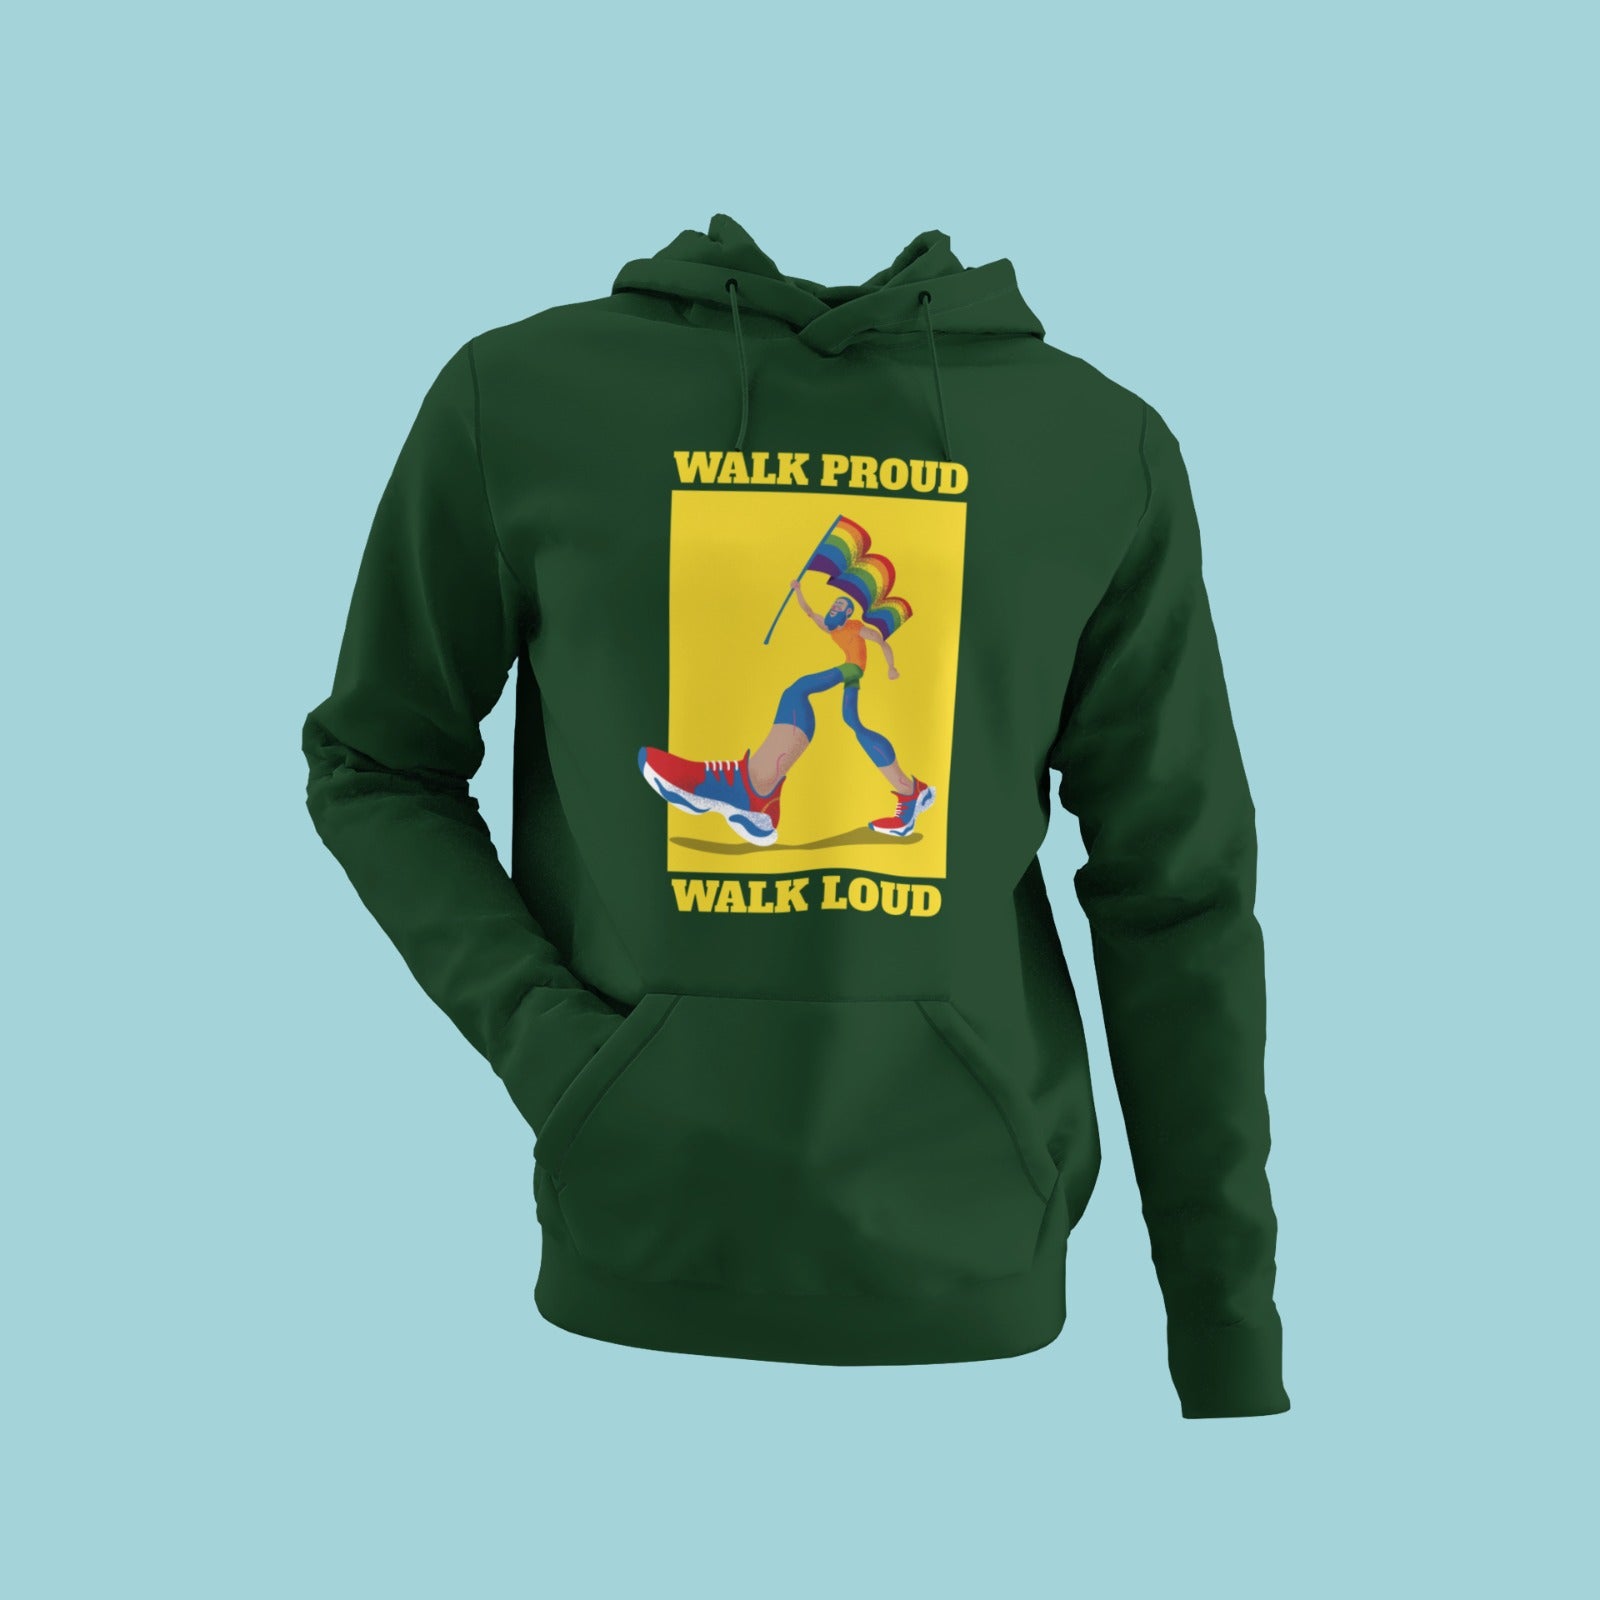 "Walk loud, walk proud" with this green hoodie featuring a graphic of a person taking a bold stride with the rainbow pride flag. Show your support for the LGBTQ+ community and make a statement with this comfortable and stylish hoodie. Available in all sizes, perfect for any occasion. Shop now!